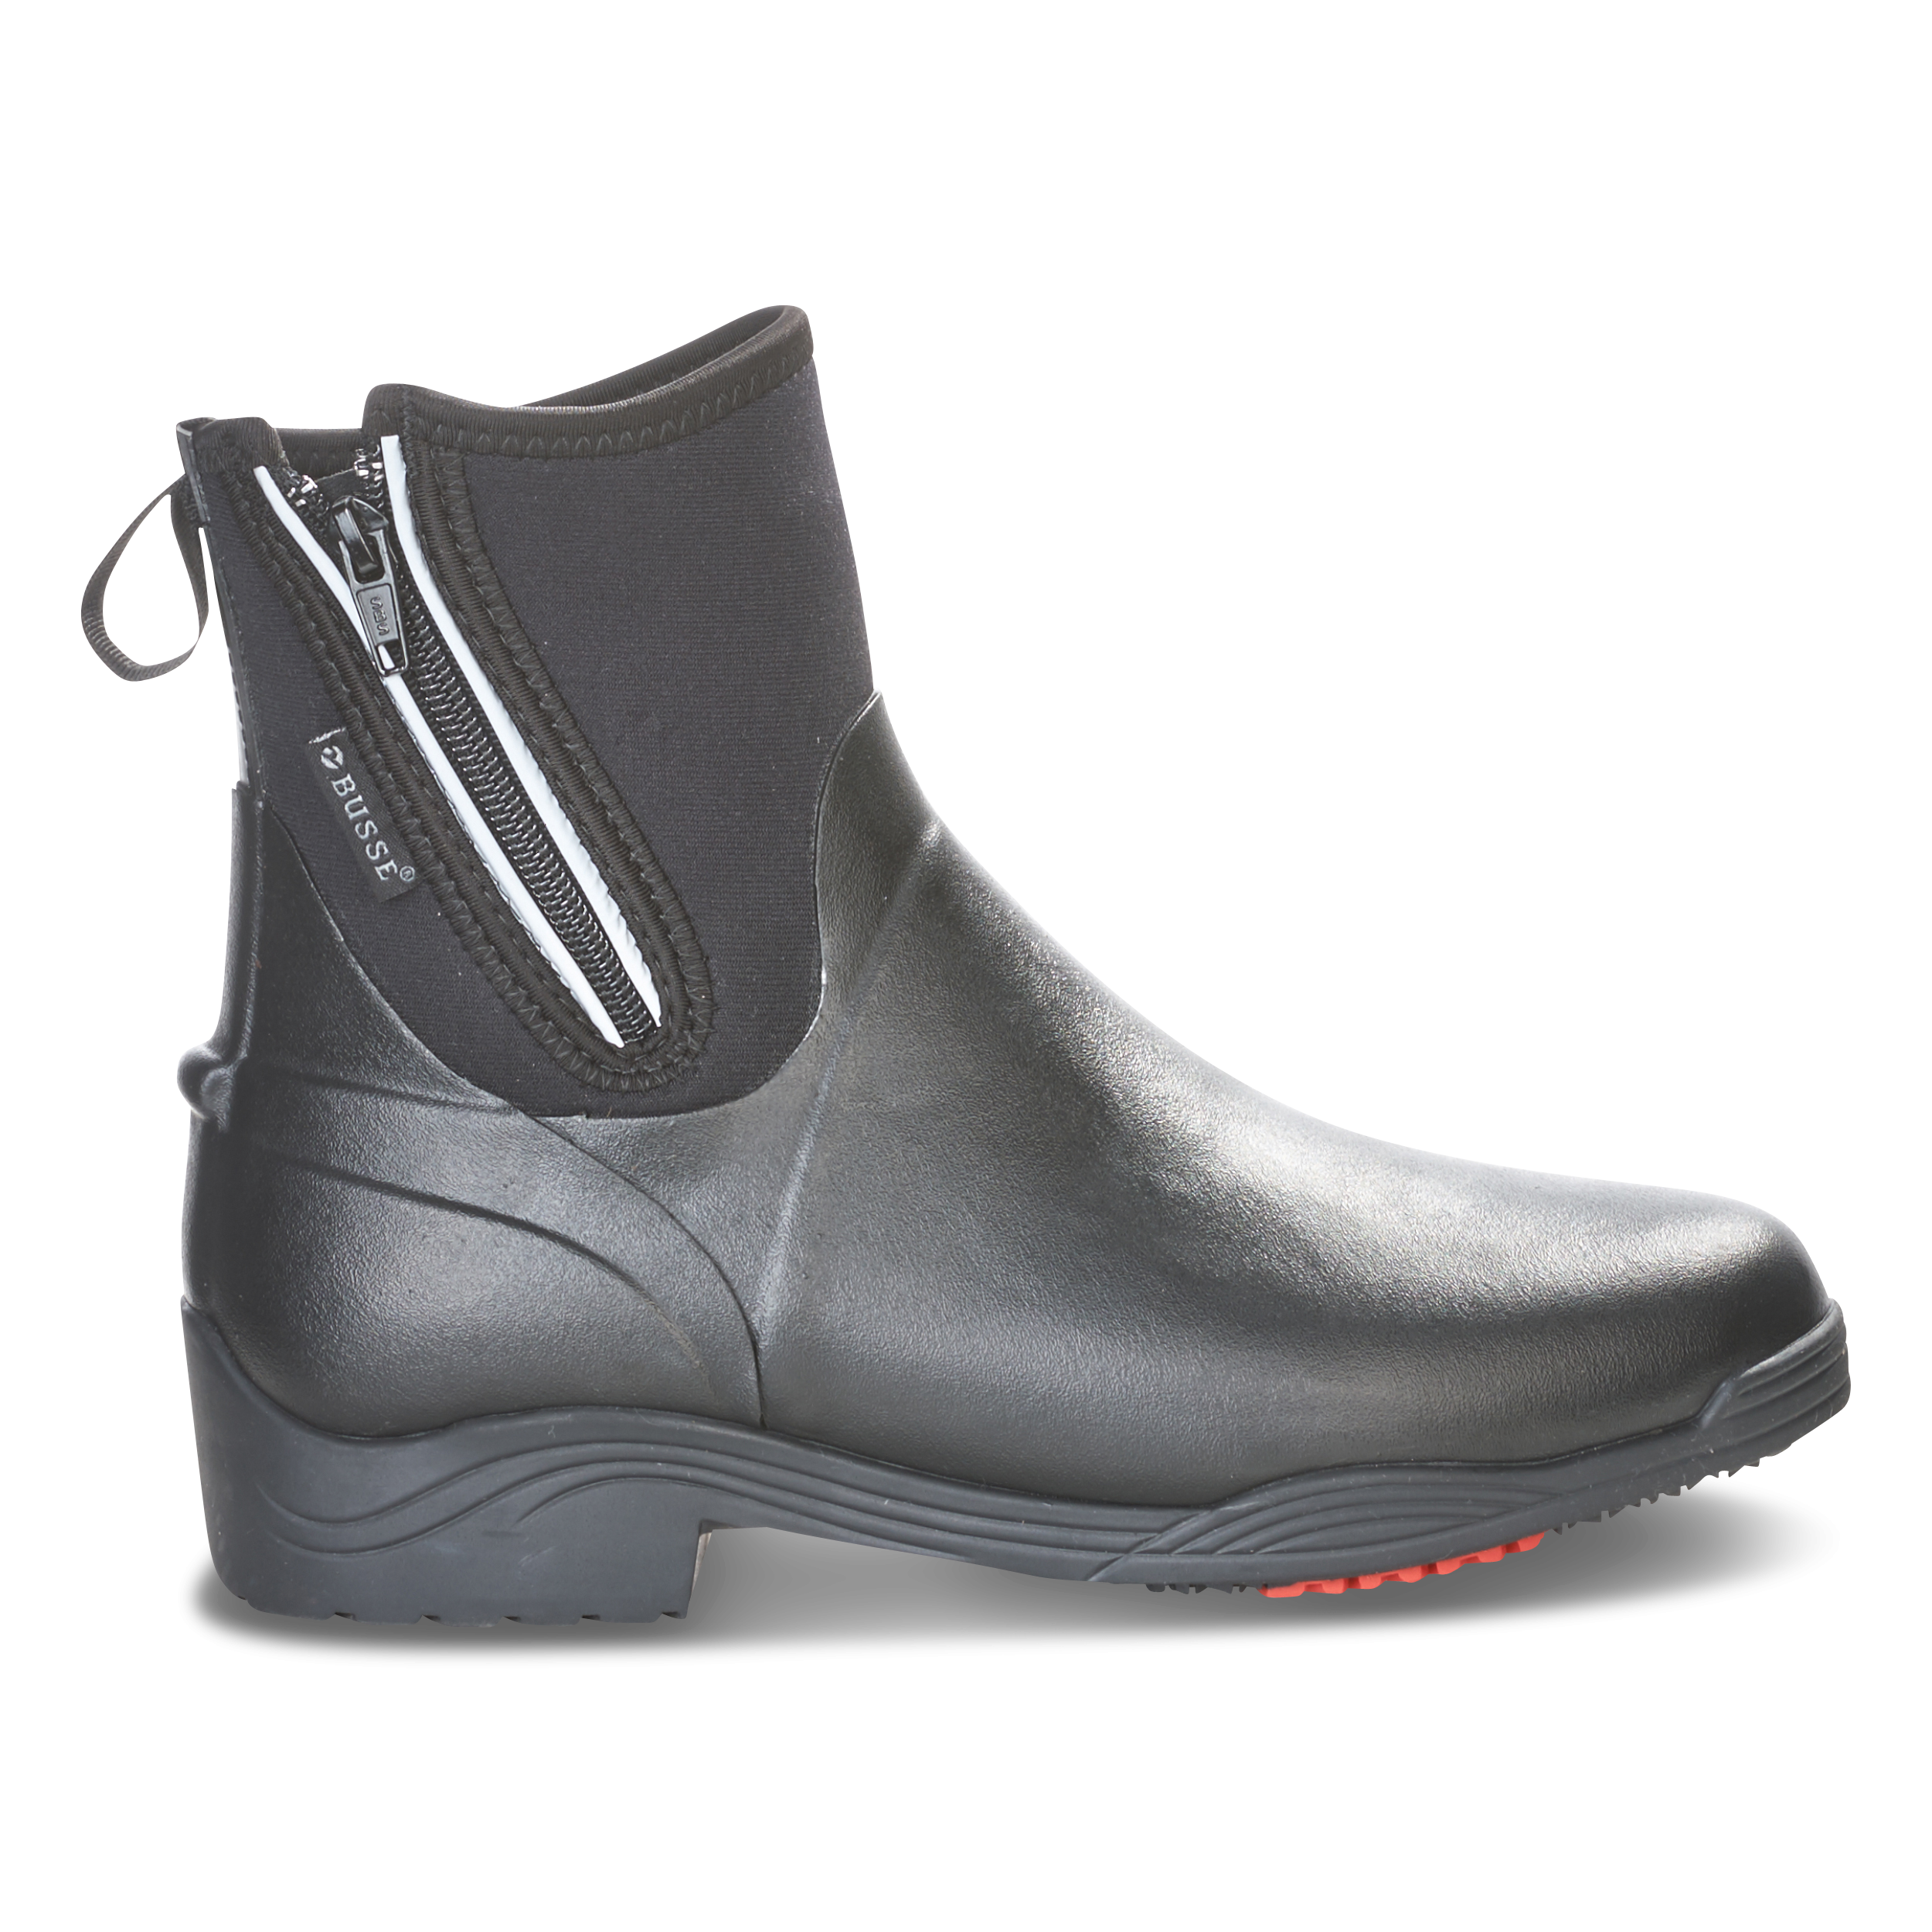 Busse Stiefeletten Mud Boots Calgary